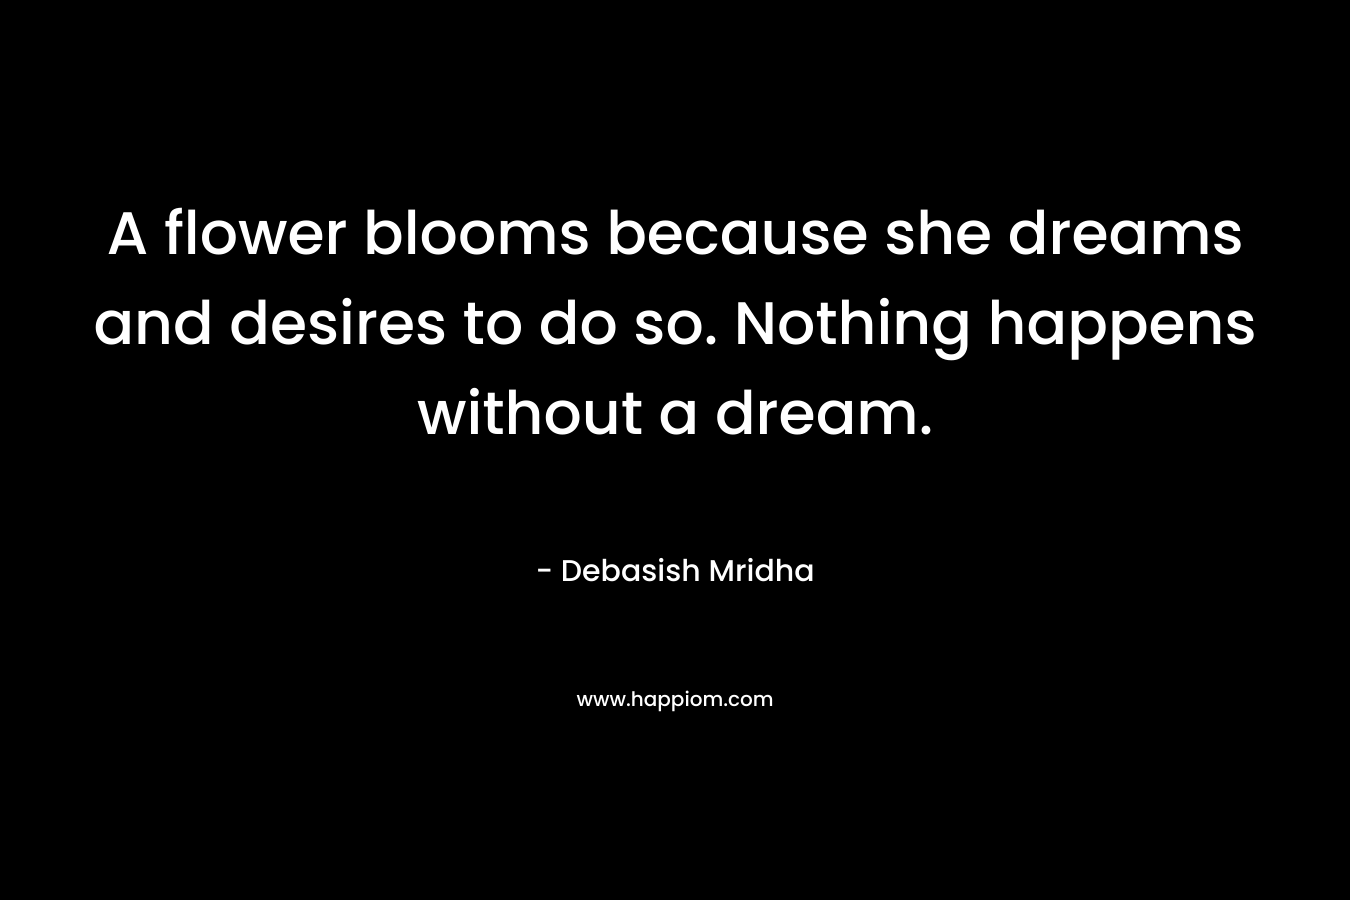 A flower blooms because she dreams and desires to do so. Nothing happens without a dream.